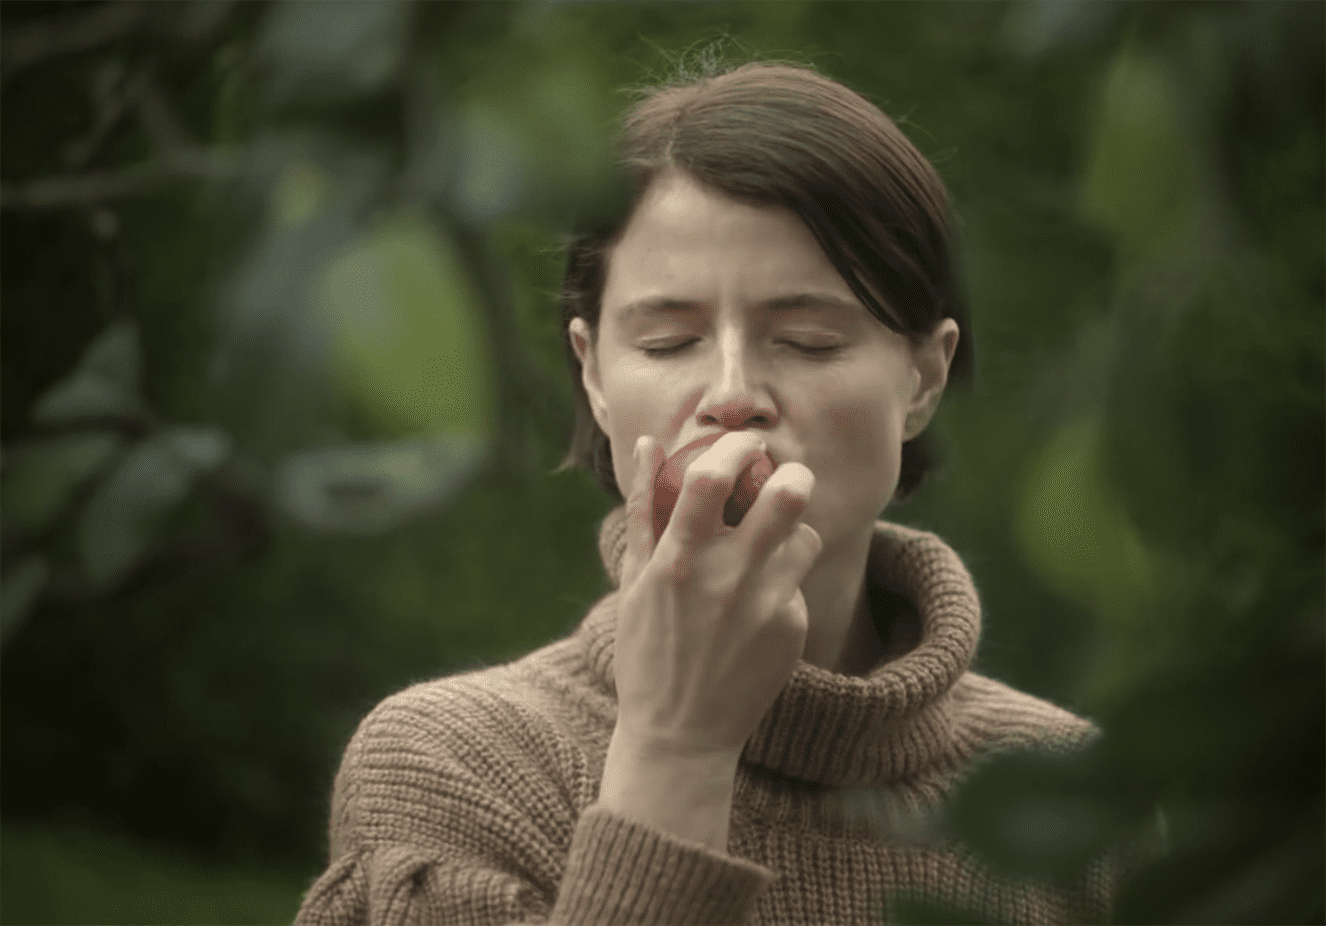 Harper (Jessie Buckley) takes a bite of the “forbidden fruit." Photo courtesy of A24